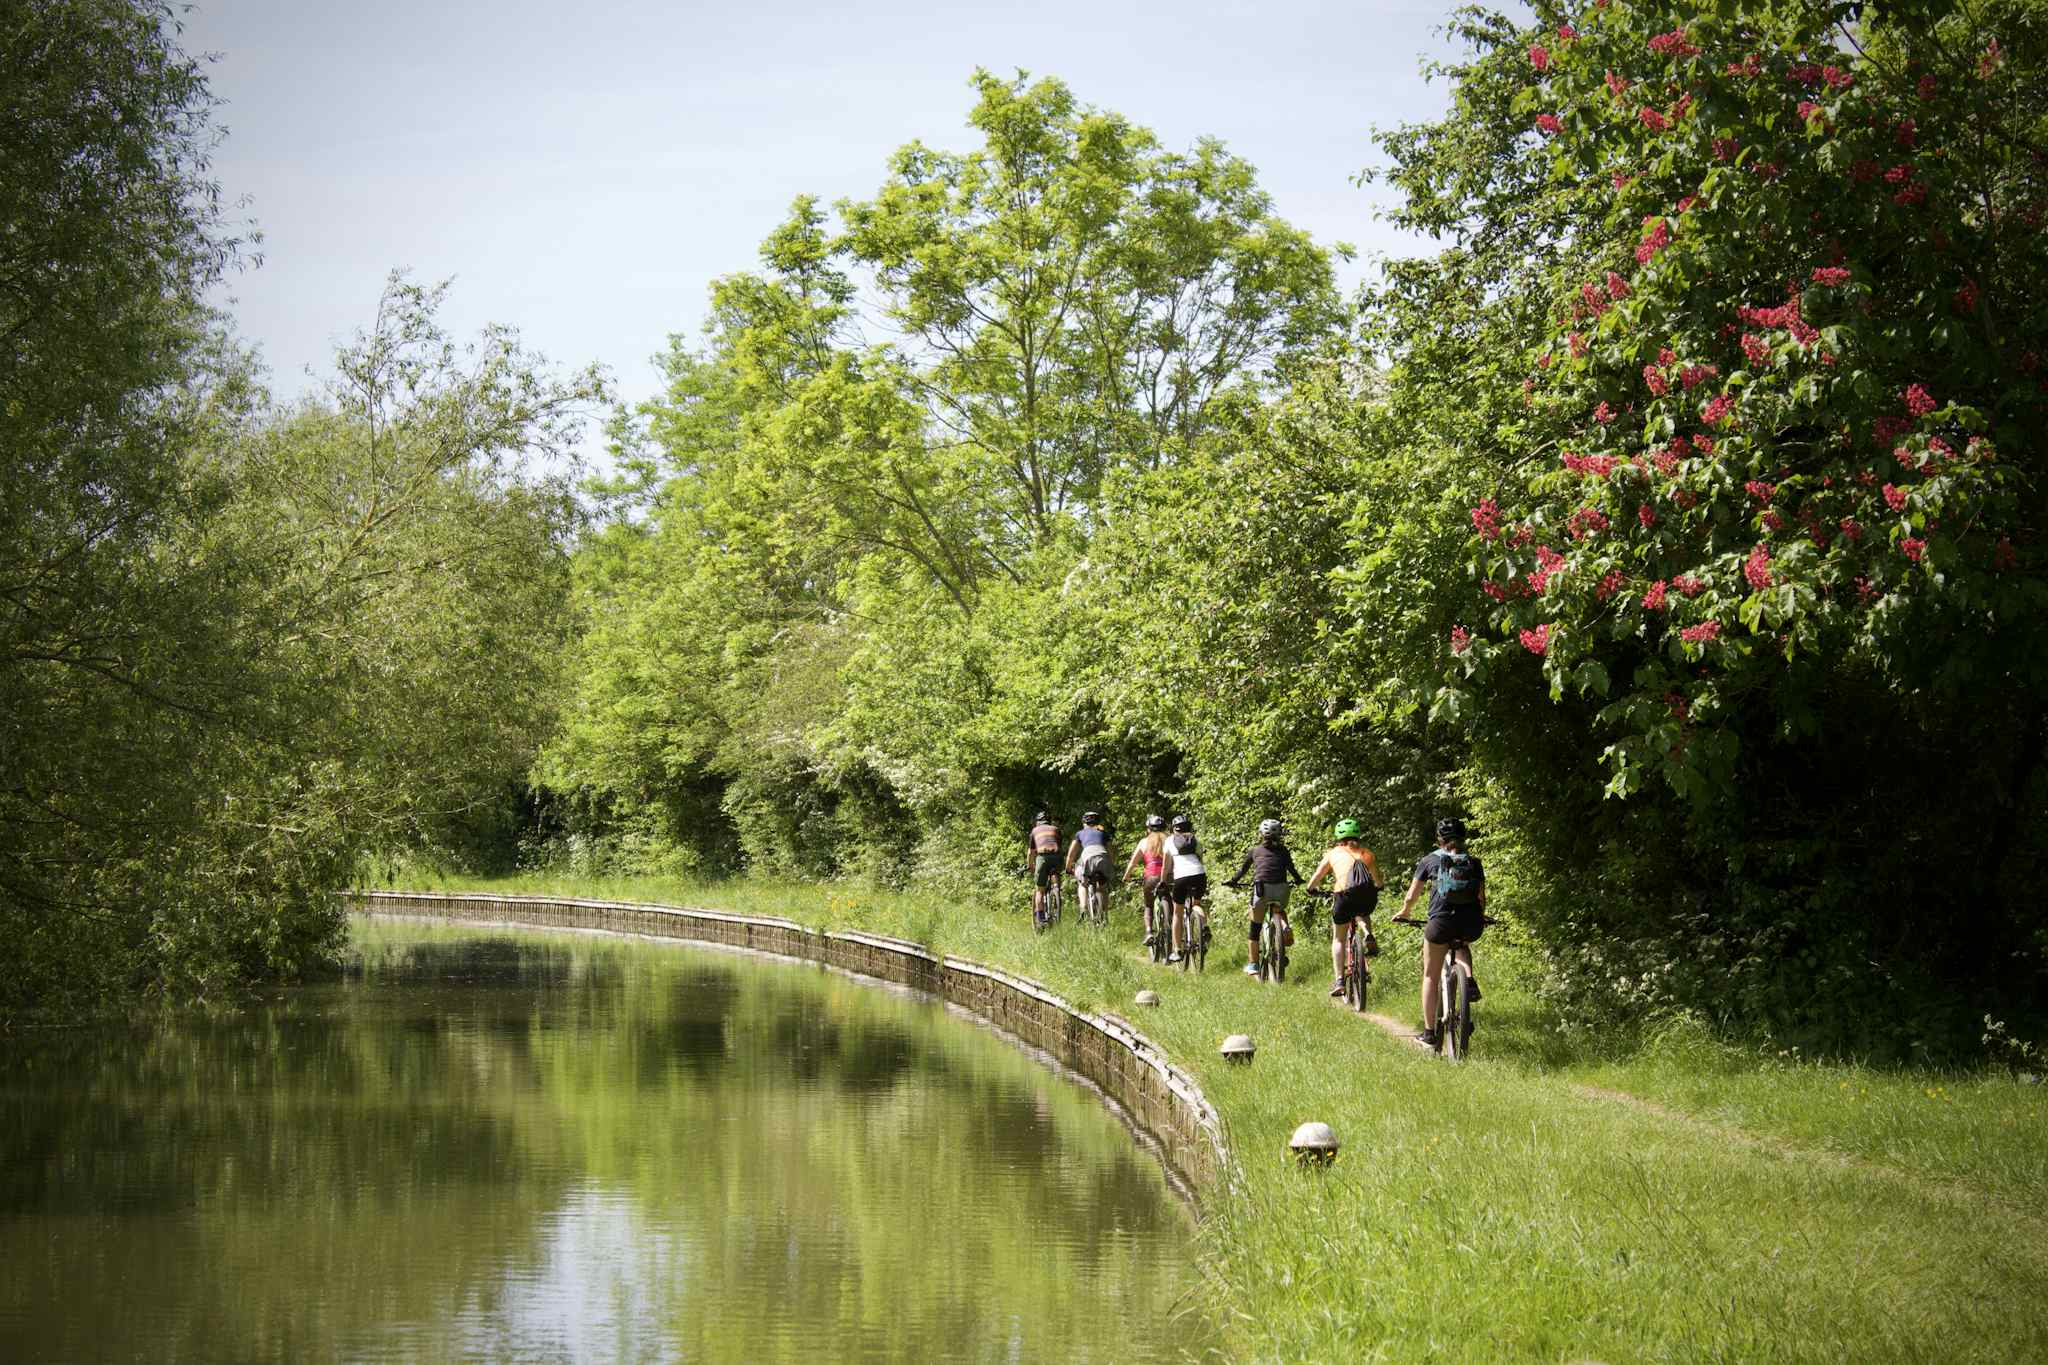 Cycling along the Grand Union Canal. Photo: Host/Wild Cycles